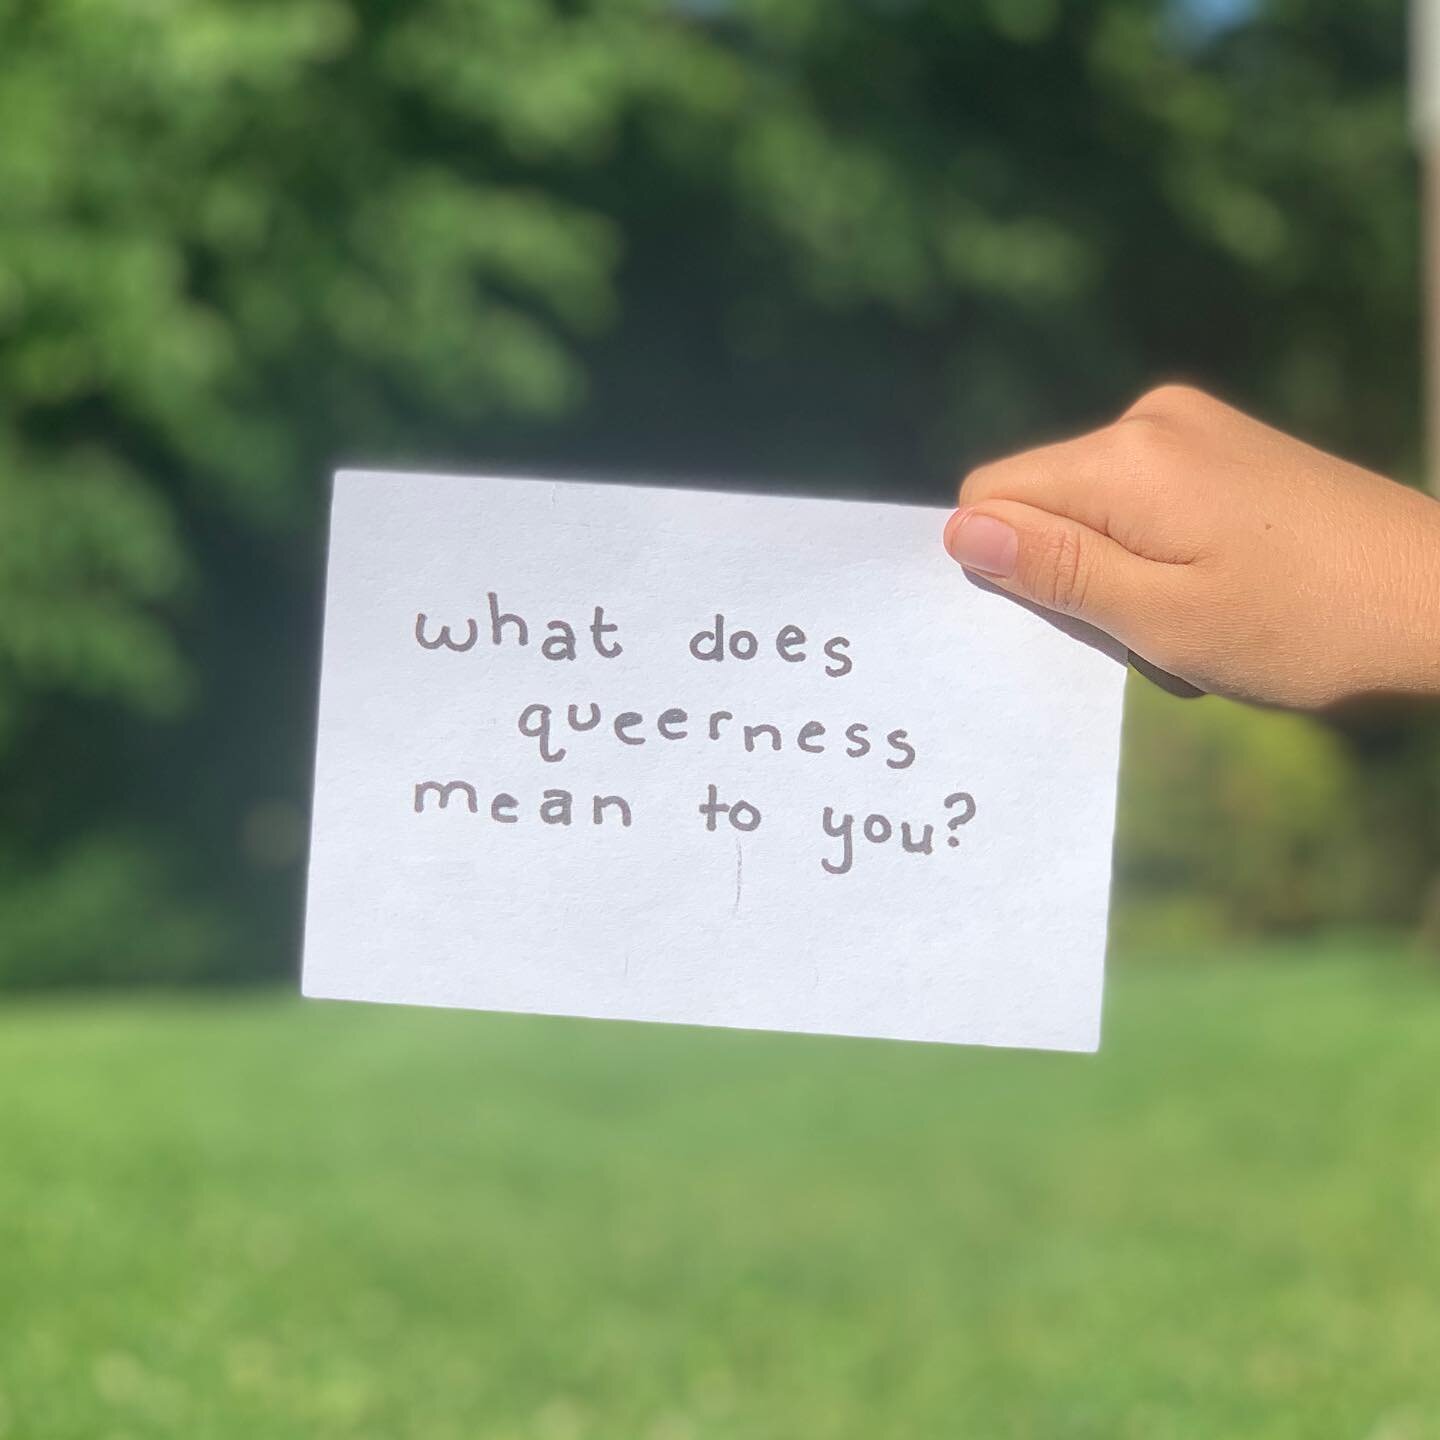 What does queerness mean to you? Responses from Pittsburgh #pridemonth events!

🖤🤎❤️🧡💛💚💙💜💖
#pride #queer #lgbtqia2s